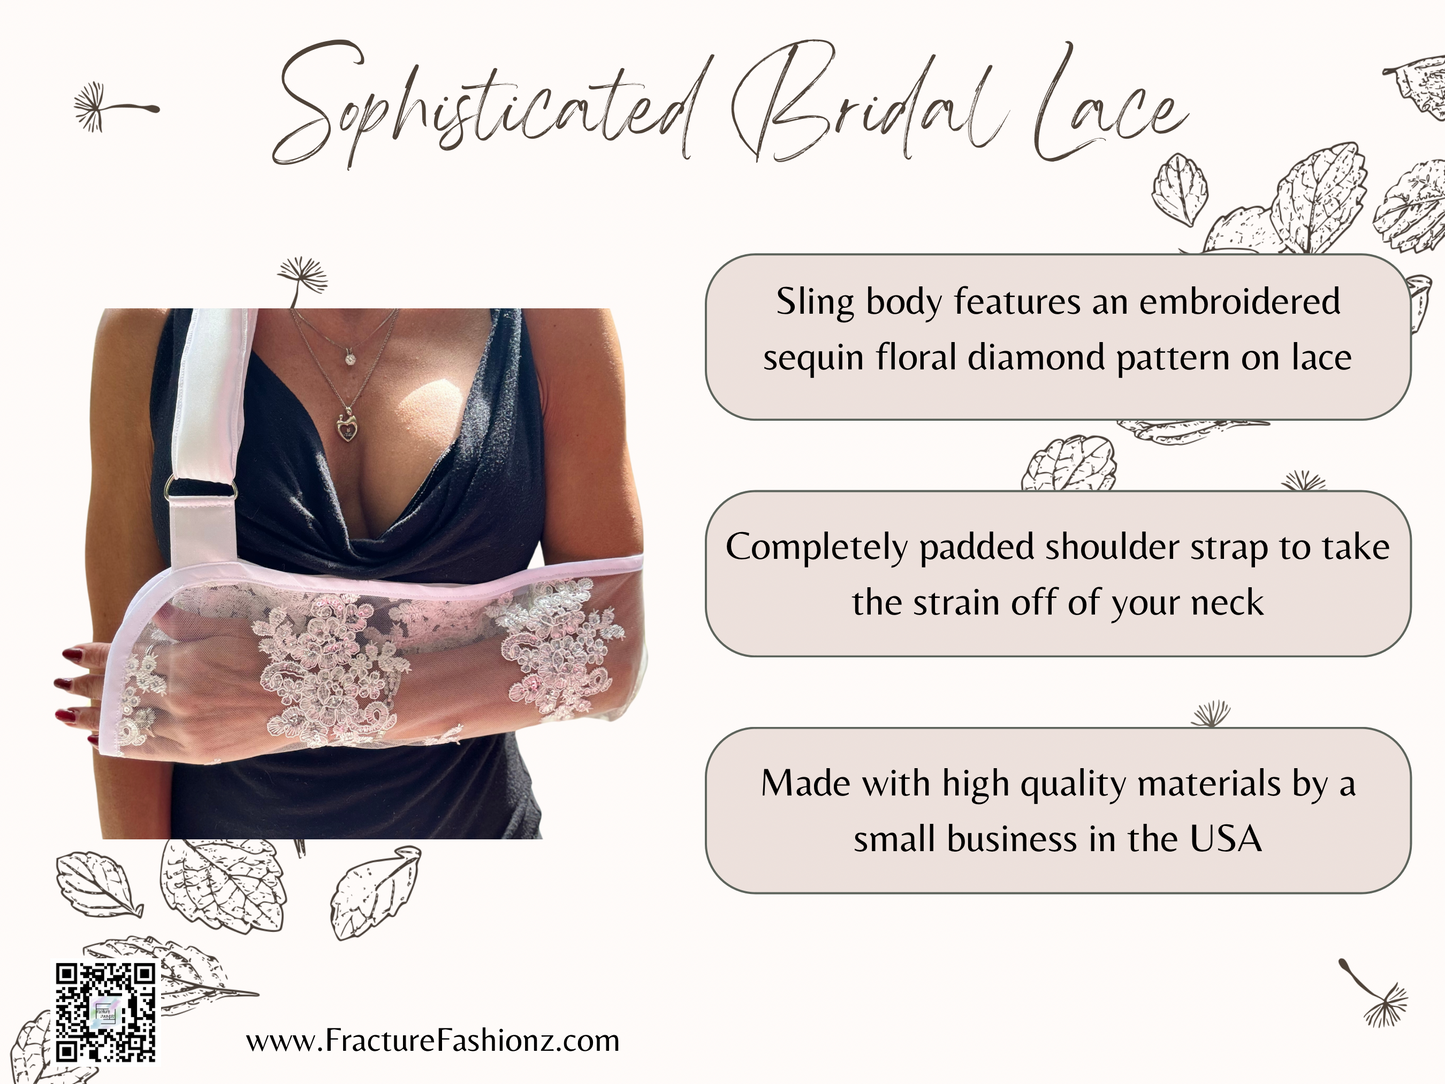 Sophisticated Bridal Lace Arm Sling: Embroidered Sequin Floral Diamond Pattern